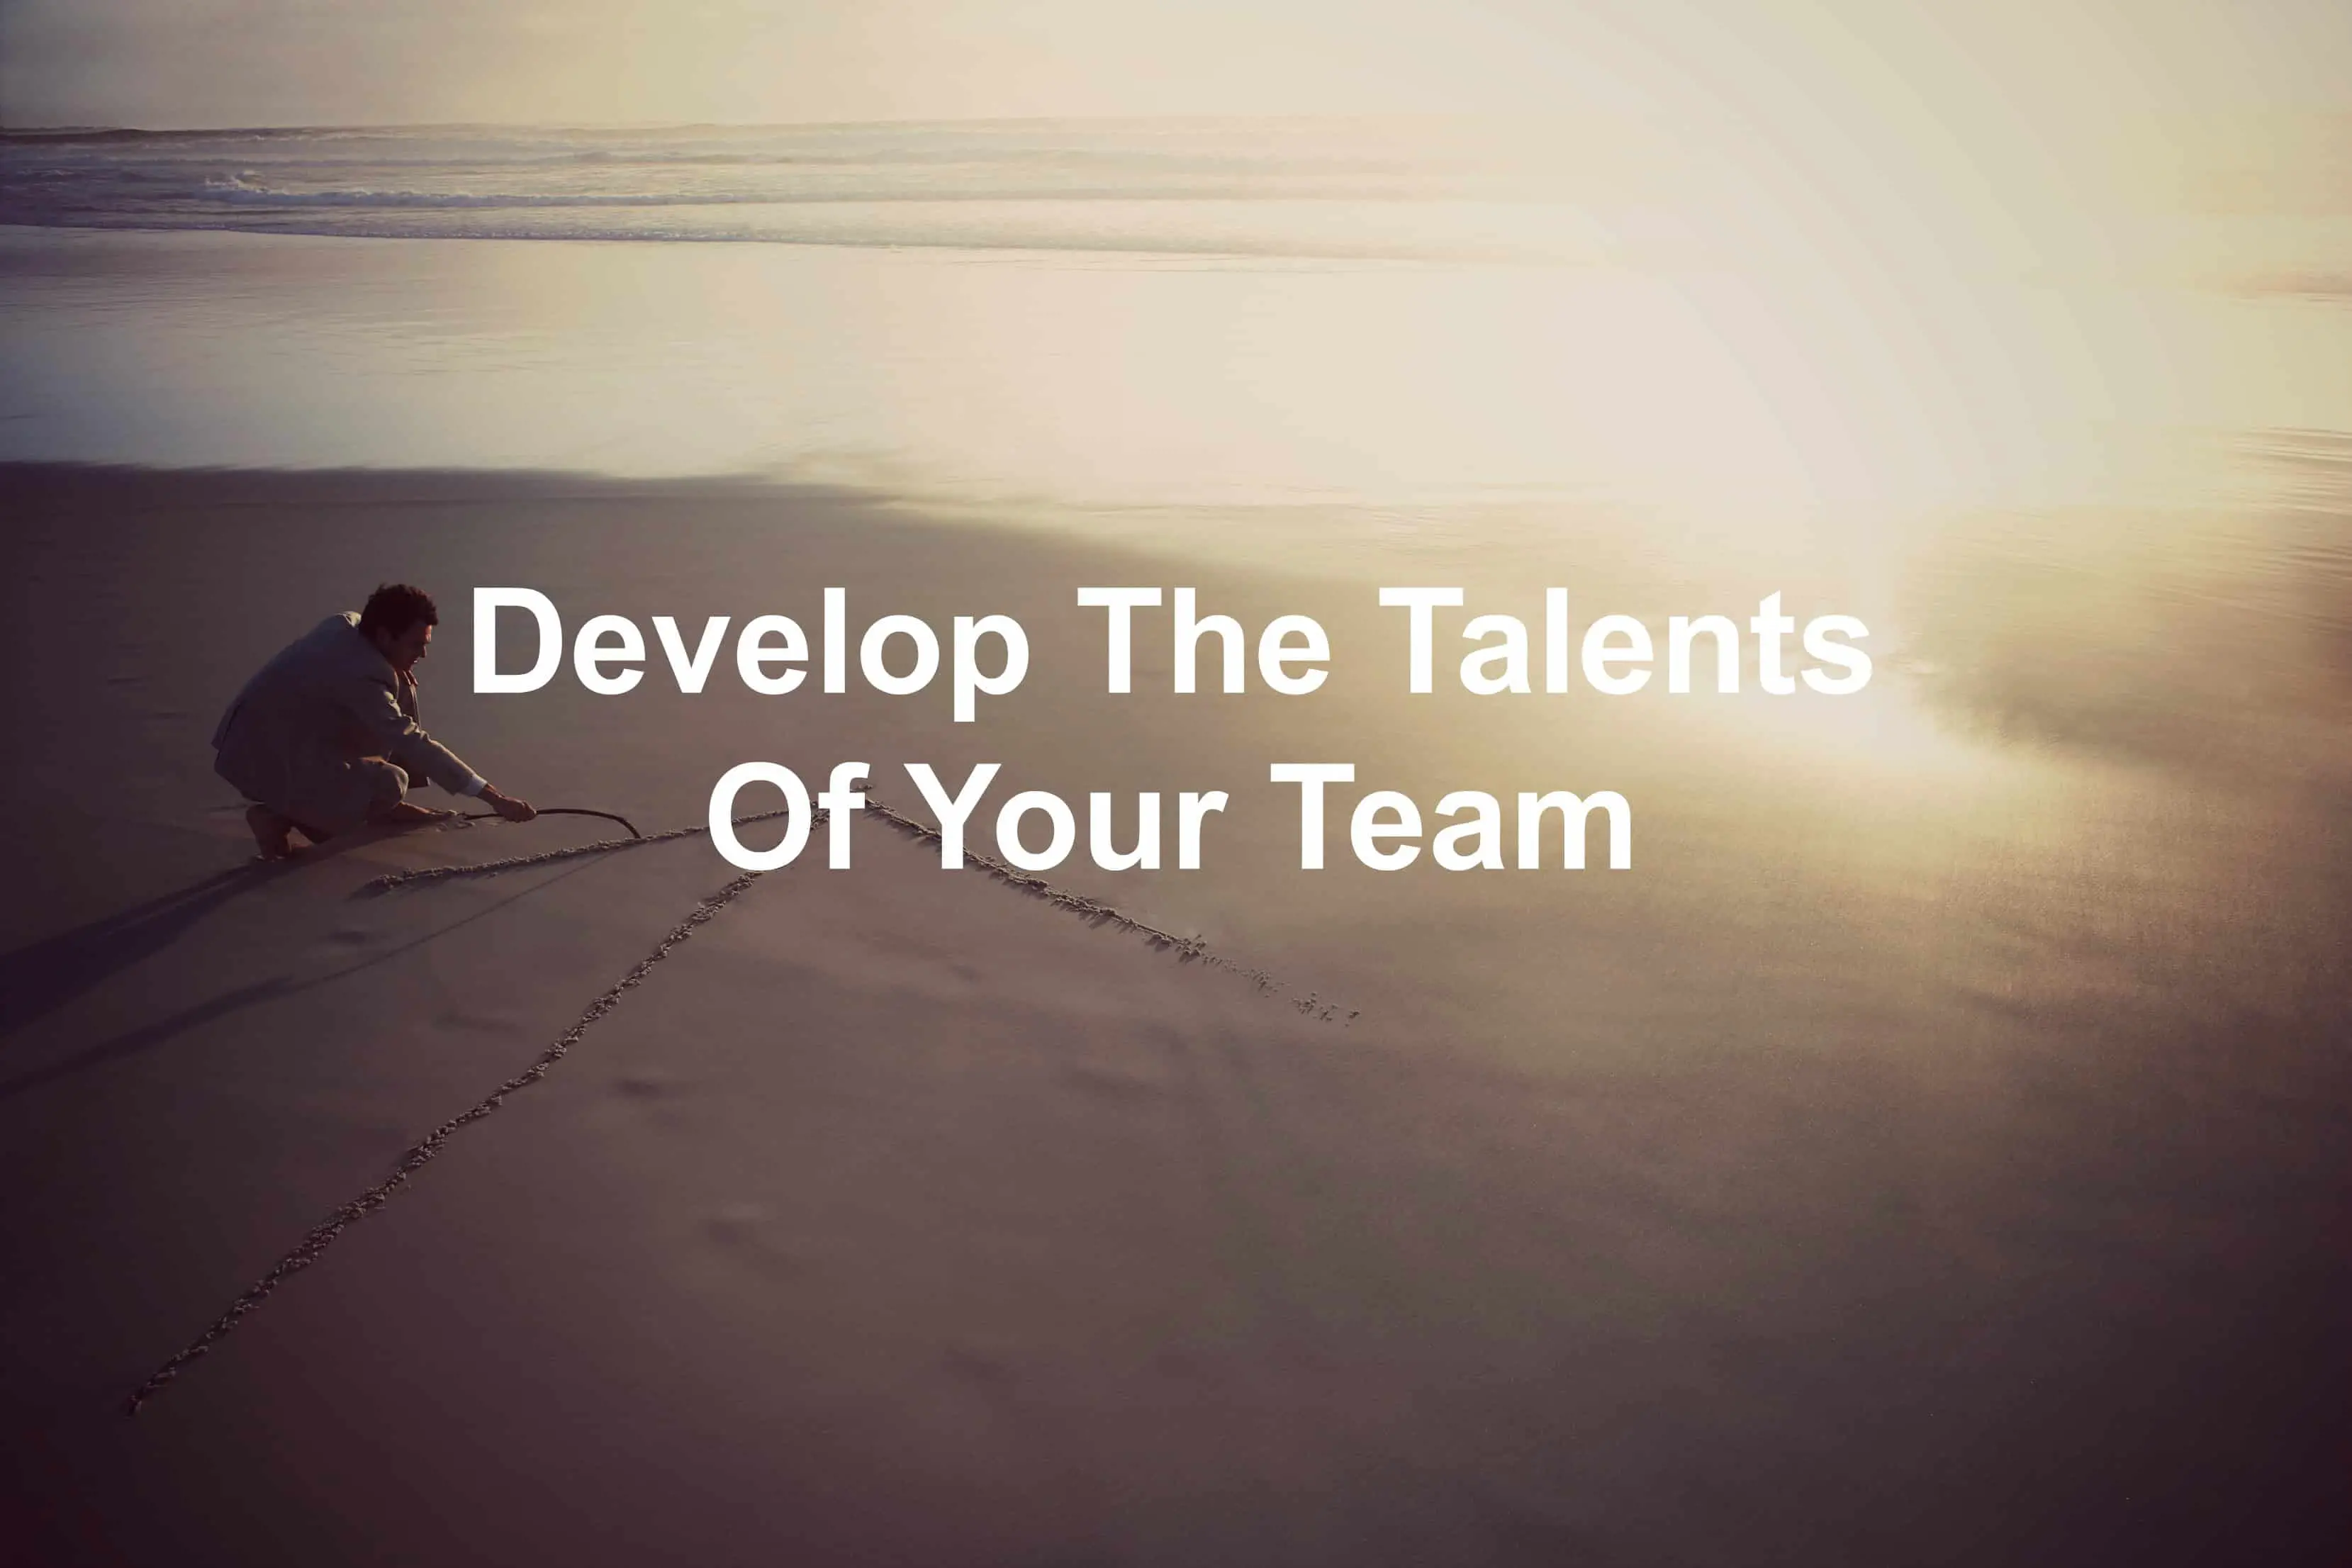 The development of your team is important